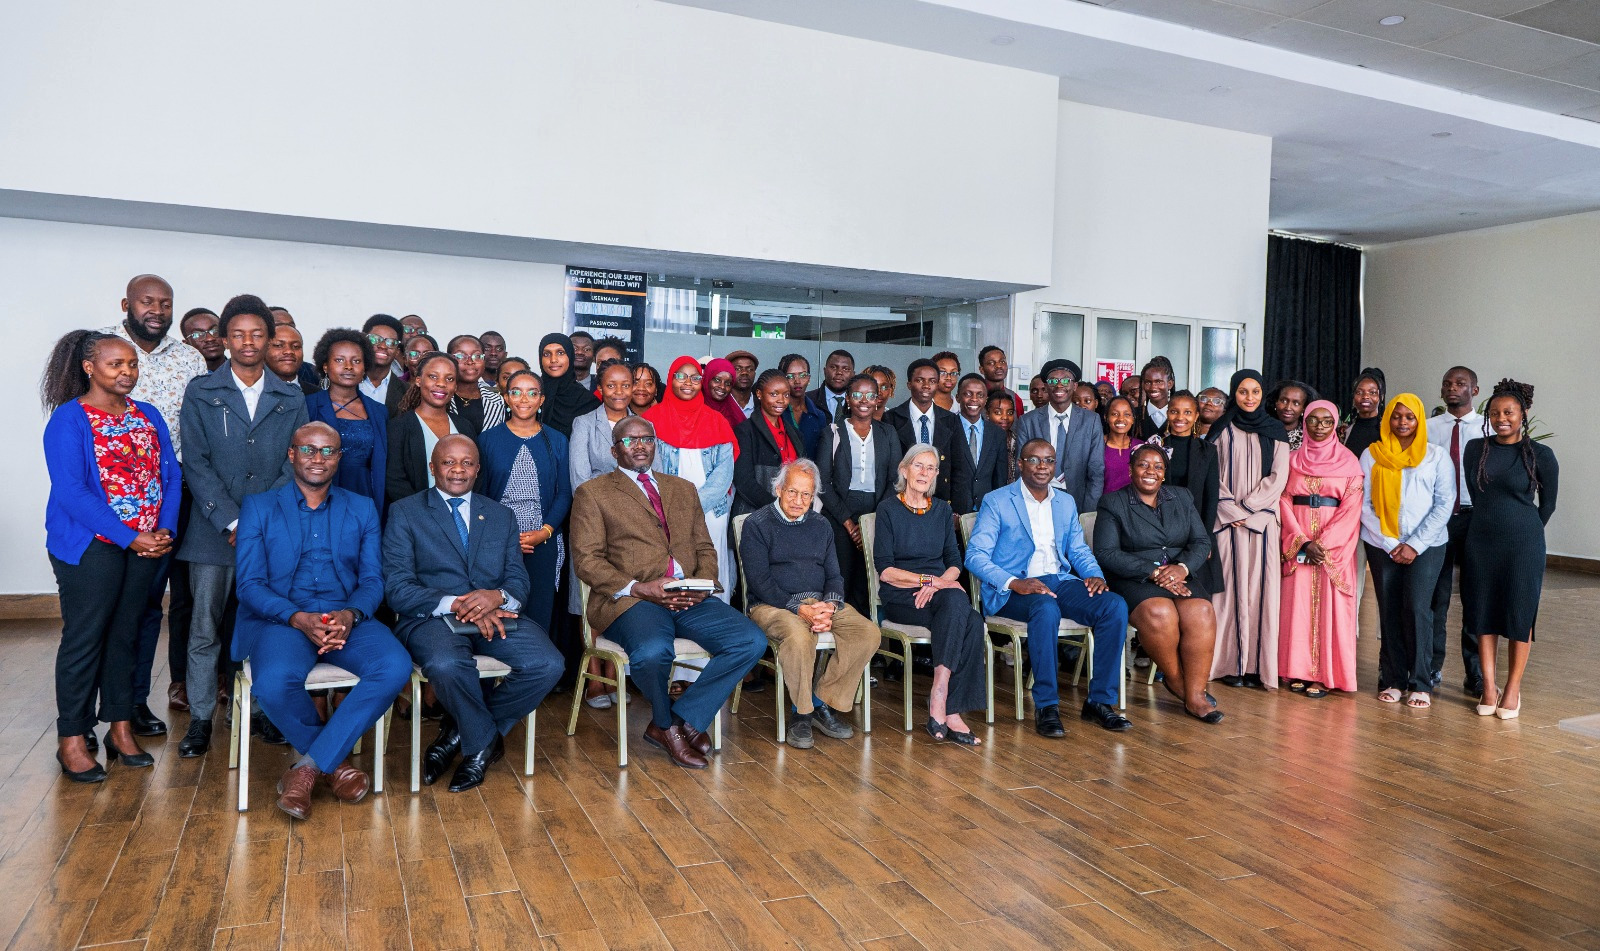 Participants drawn from 7 universities in Nairobi, Kenya after an engagement on constitutional term limits. Photo courtesy of Katiba Institute.